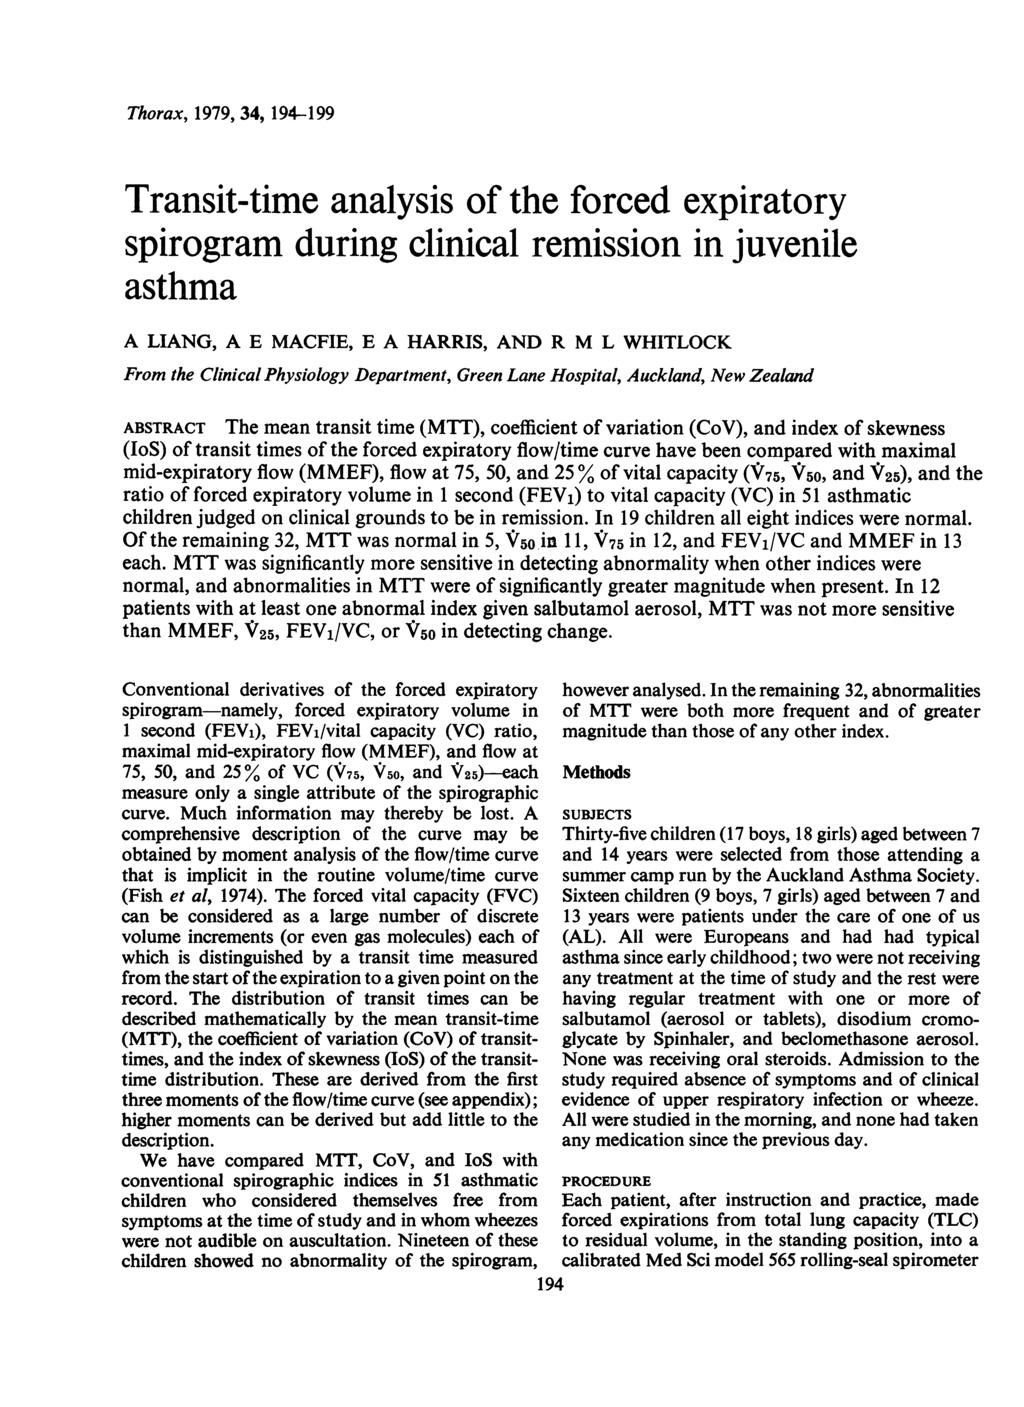 Thorax, 1979, 34, 194-199 Transit-time analysis of the forced expiratory spirogram during clinical remission in juvenile asthma A LIANG, A E MACFIE, E A HARRIS, AND R M L WHITLOCK From the Clinical